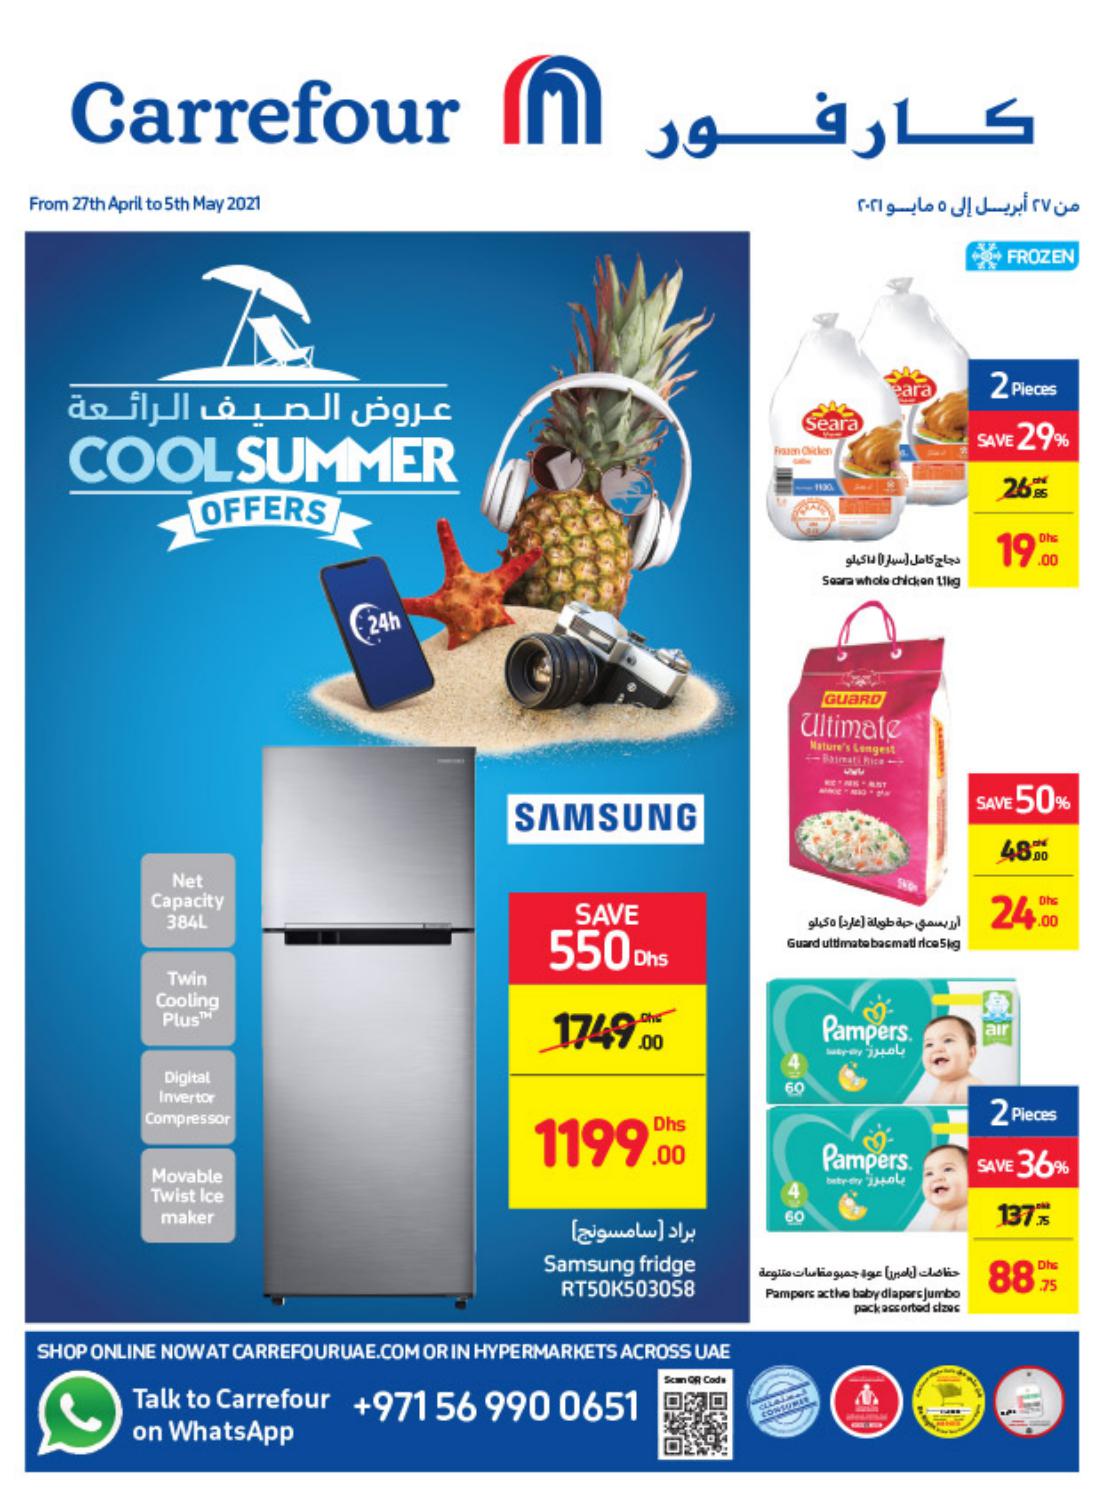 Carrefour Cool Summer Offers 2021 – Catalog